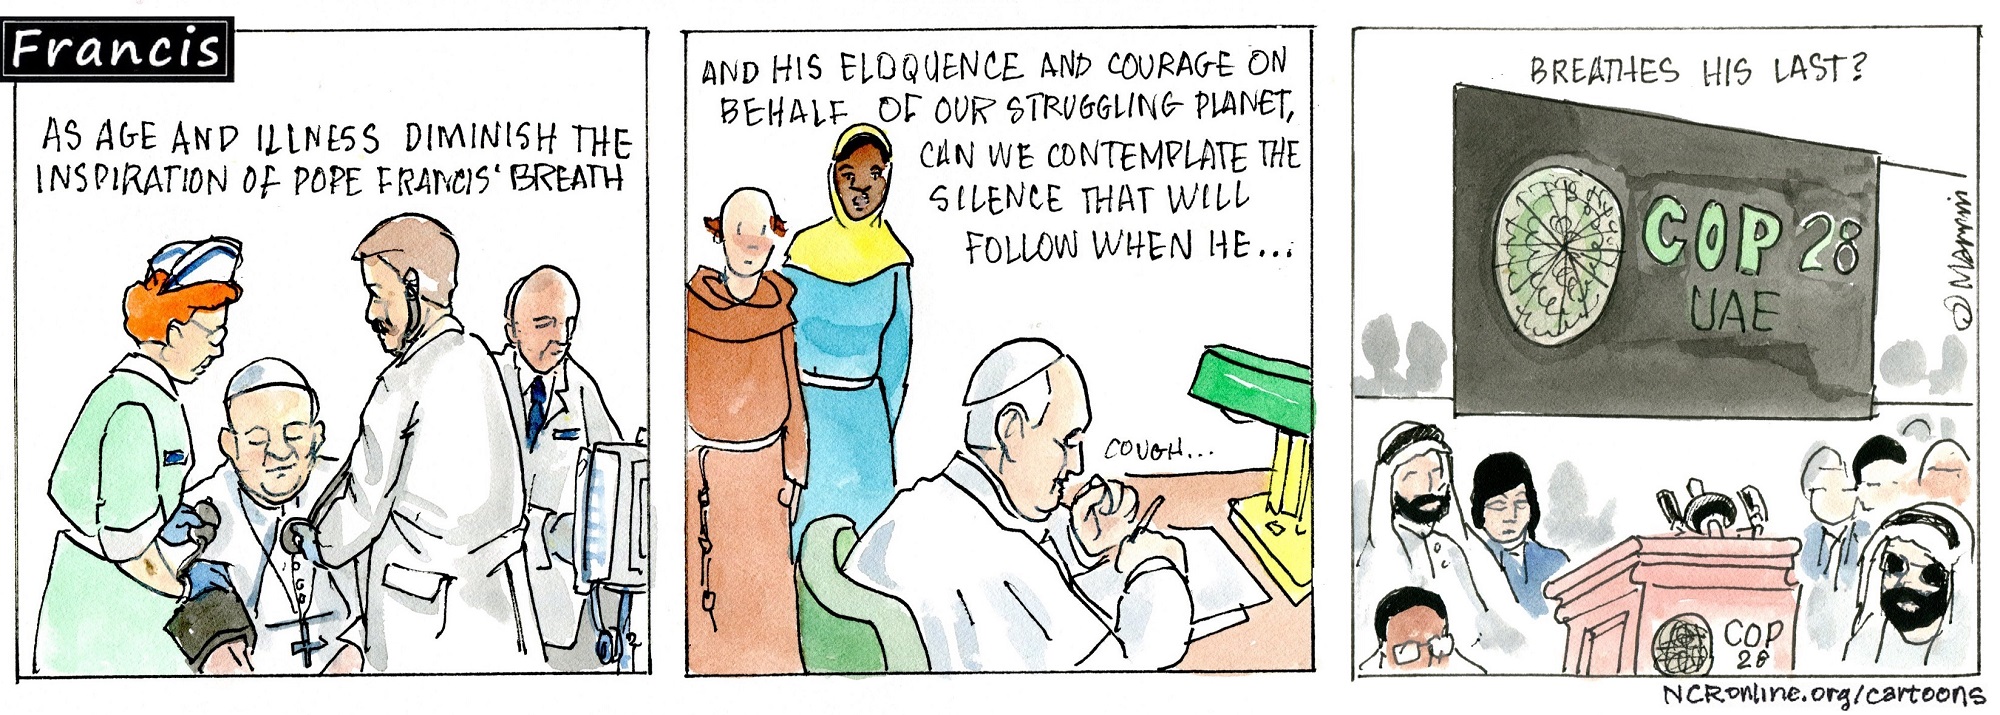 Francis, the comic strip: Francis has been an inspiration in word and breath. But age and illness take a toll.